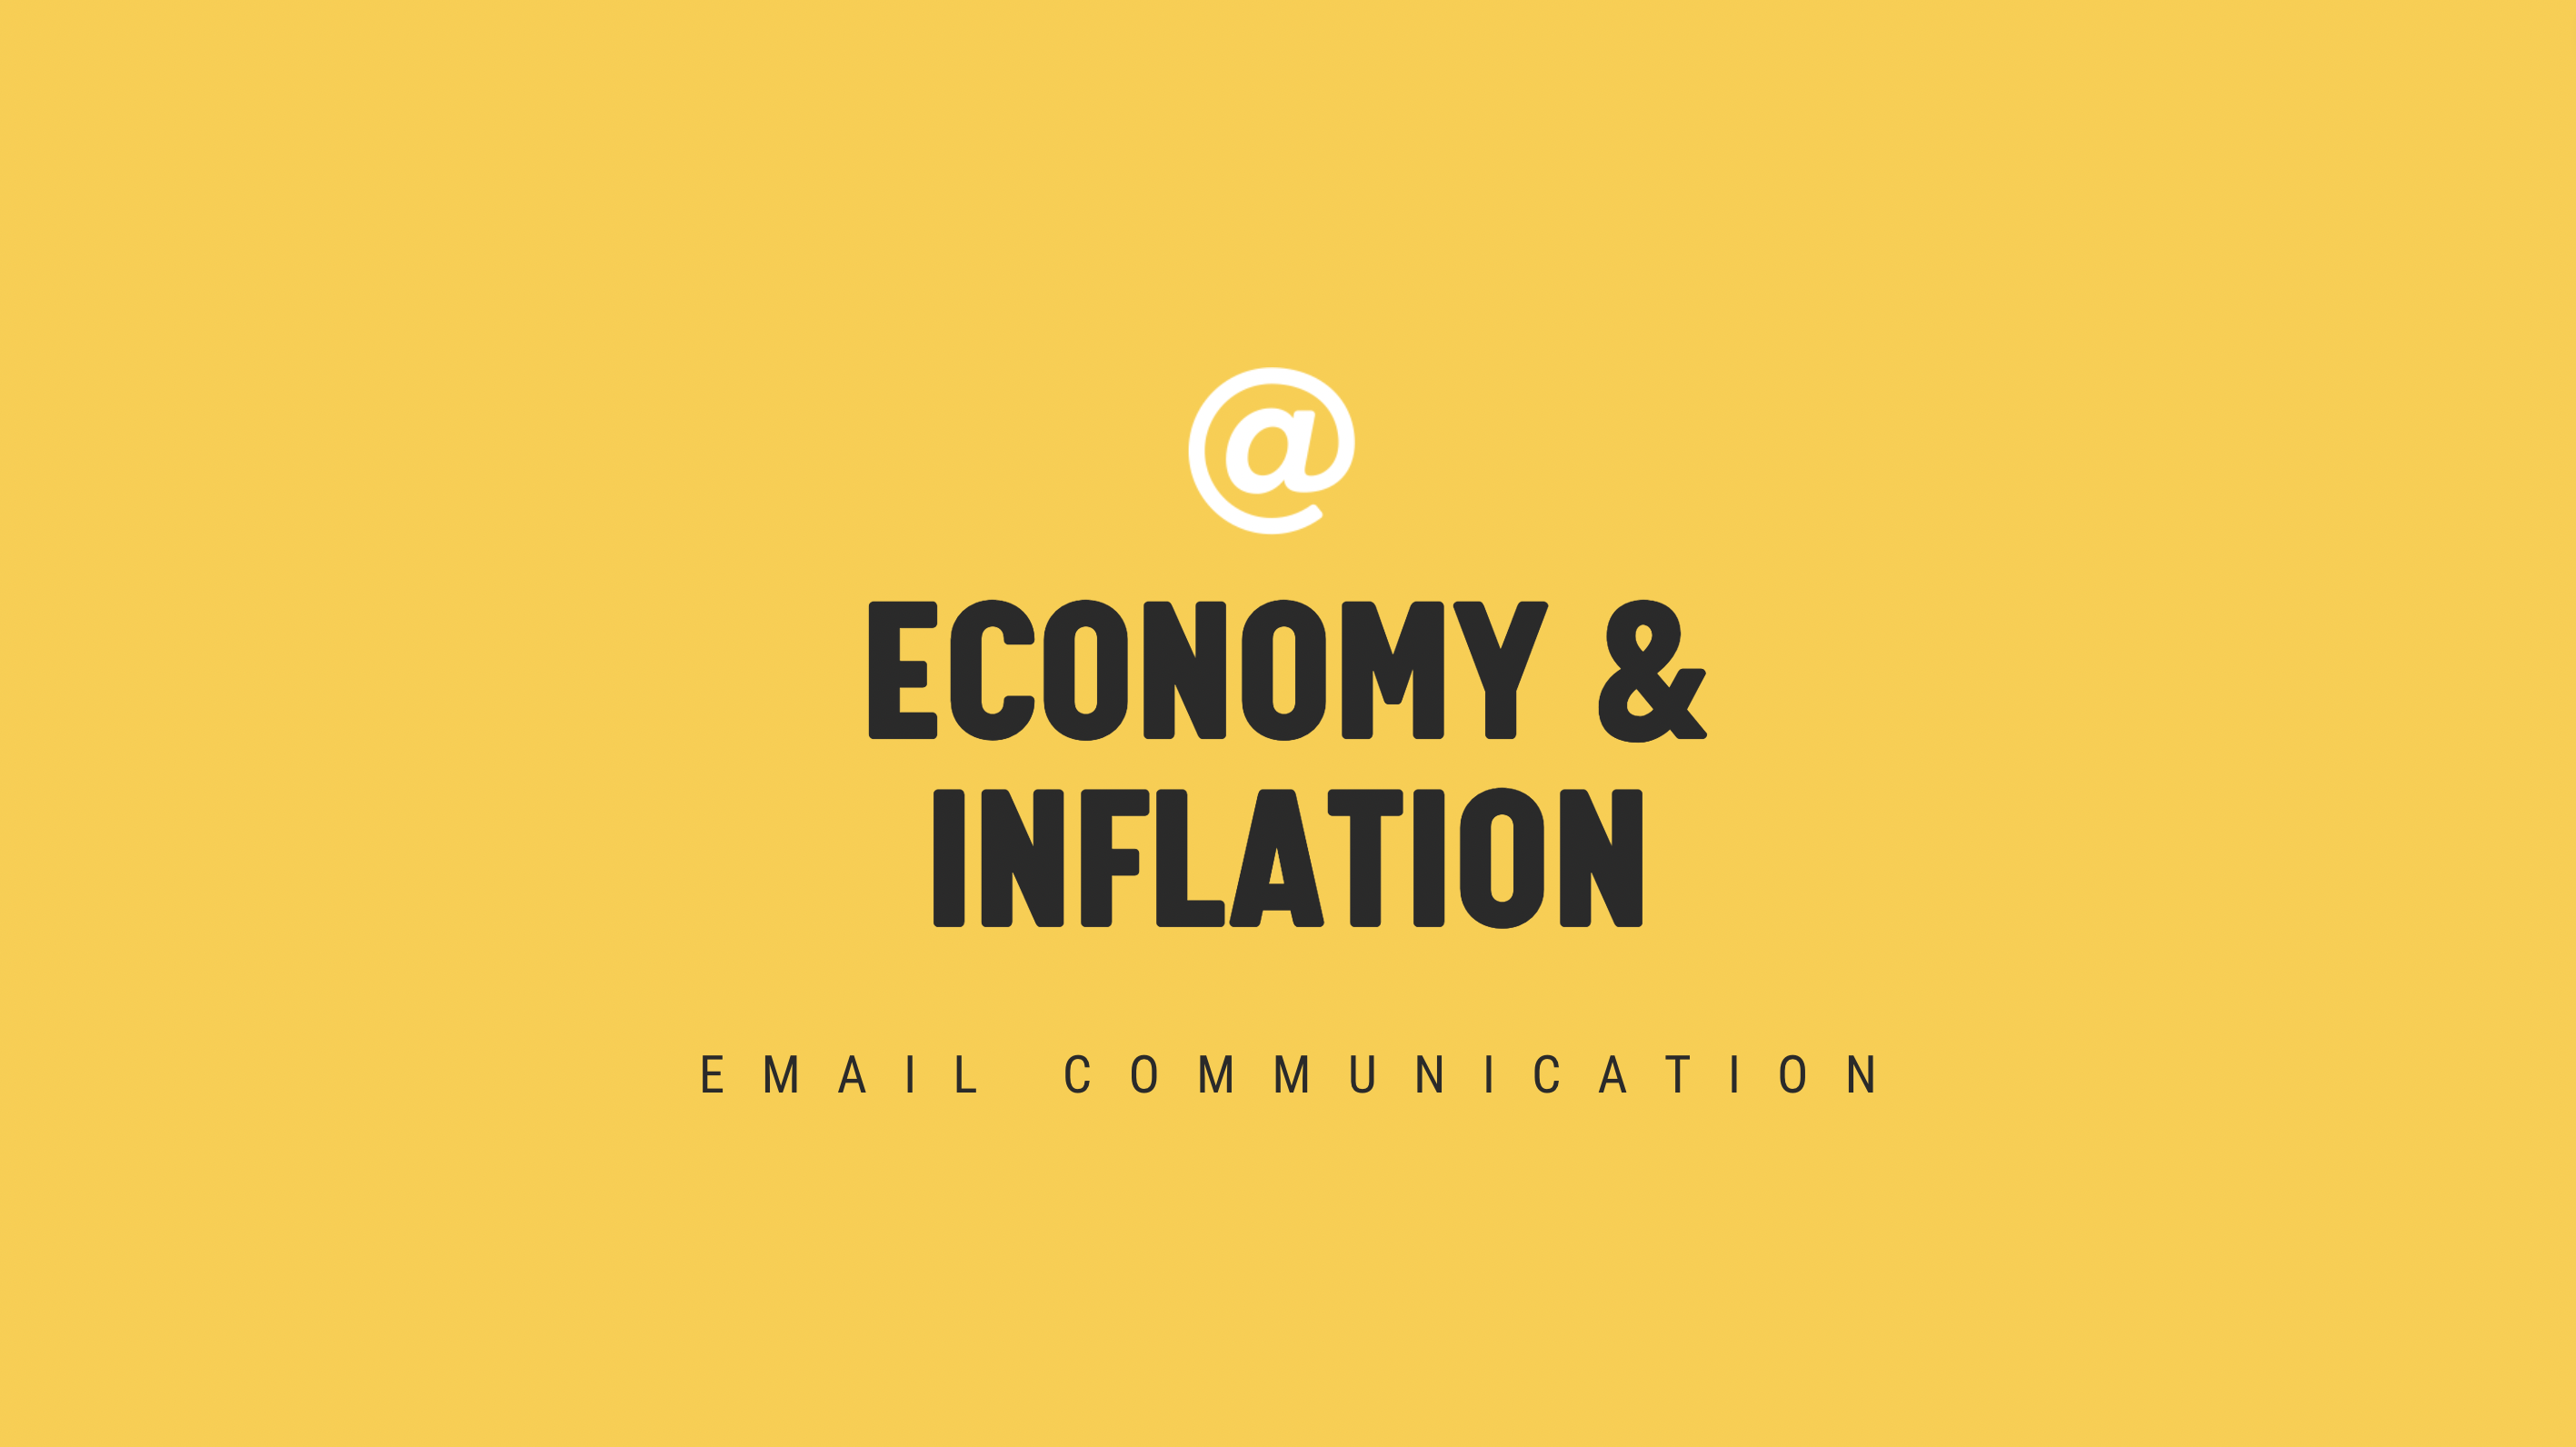 [NEW] Economy & Inflation - Timely Email